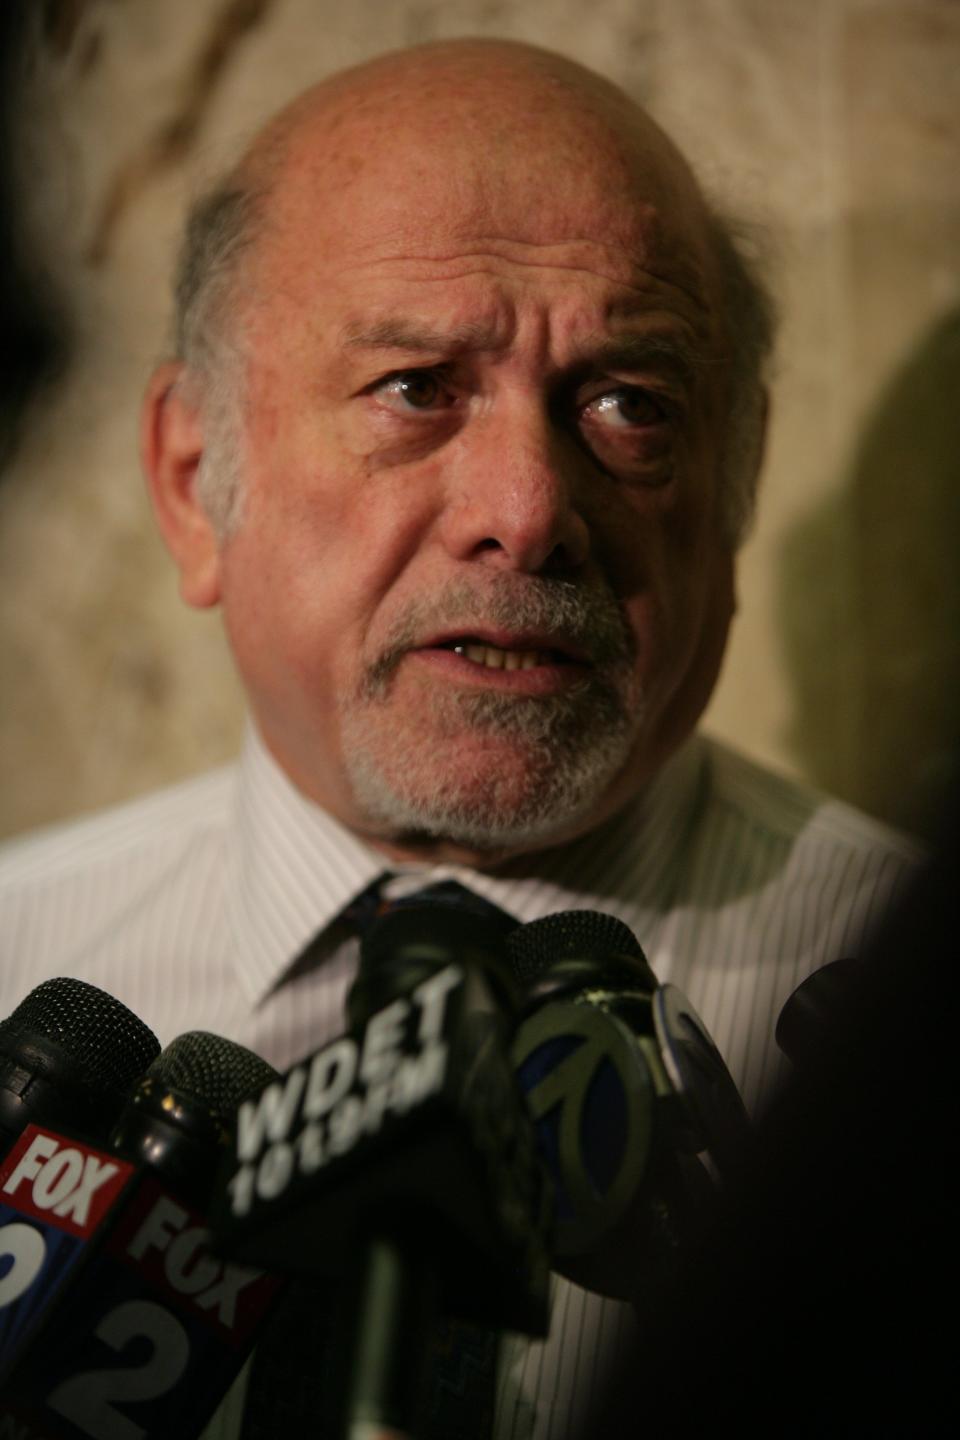 Bill Goodman, shown here speaking to the media in July 2008 when he was independent counsel for the Detroit City Council, which at the time considering was considering removing Mayor Kwame Kilpatrick following a text message scandal.